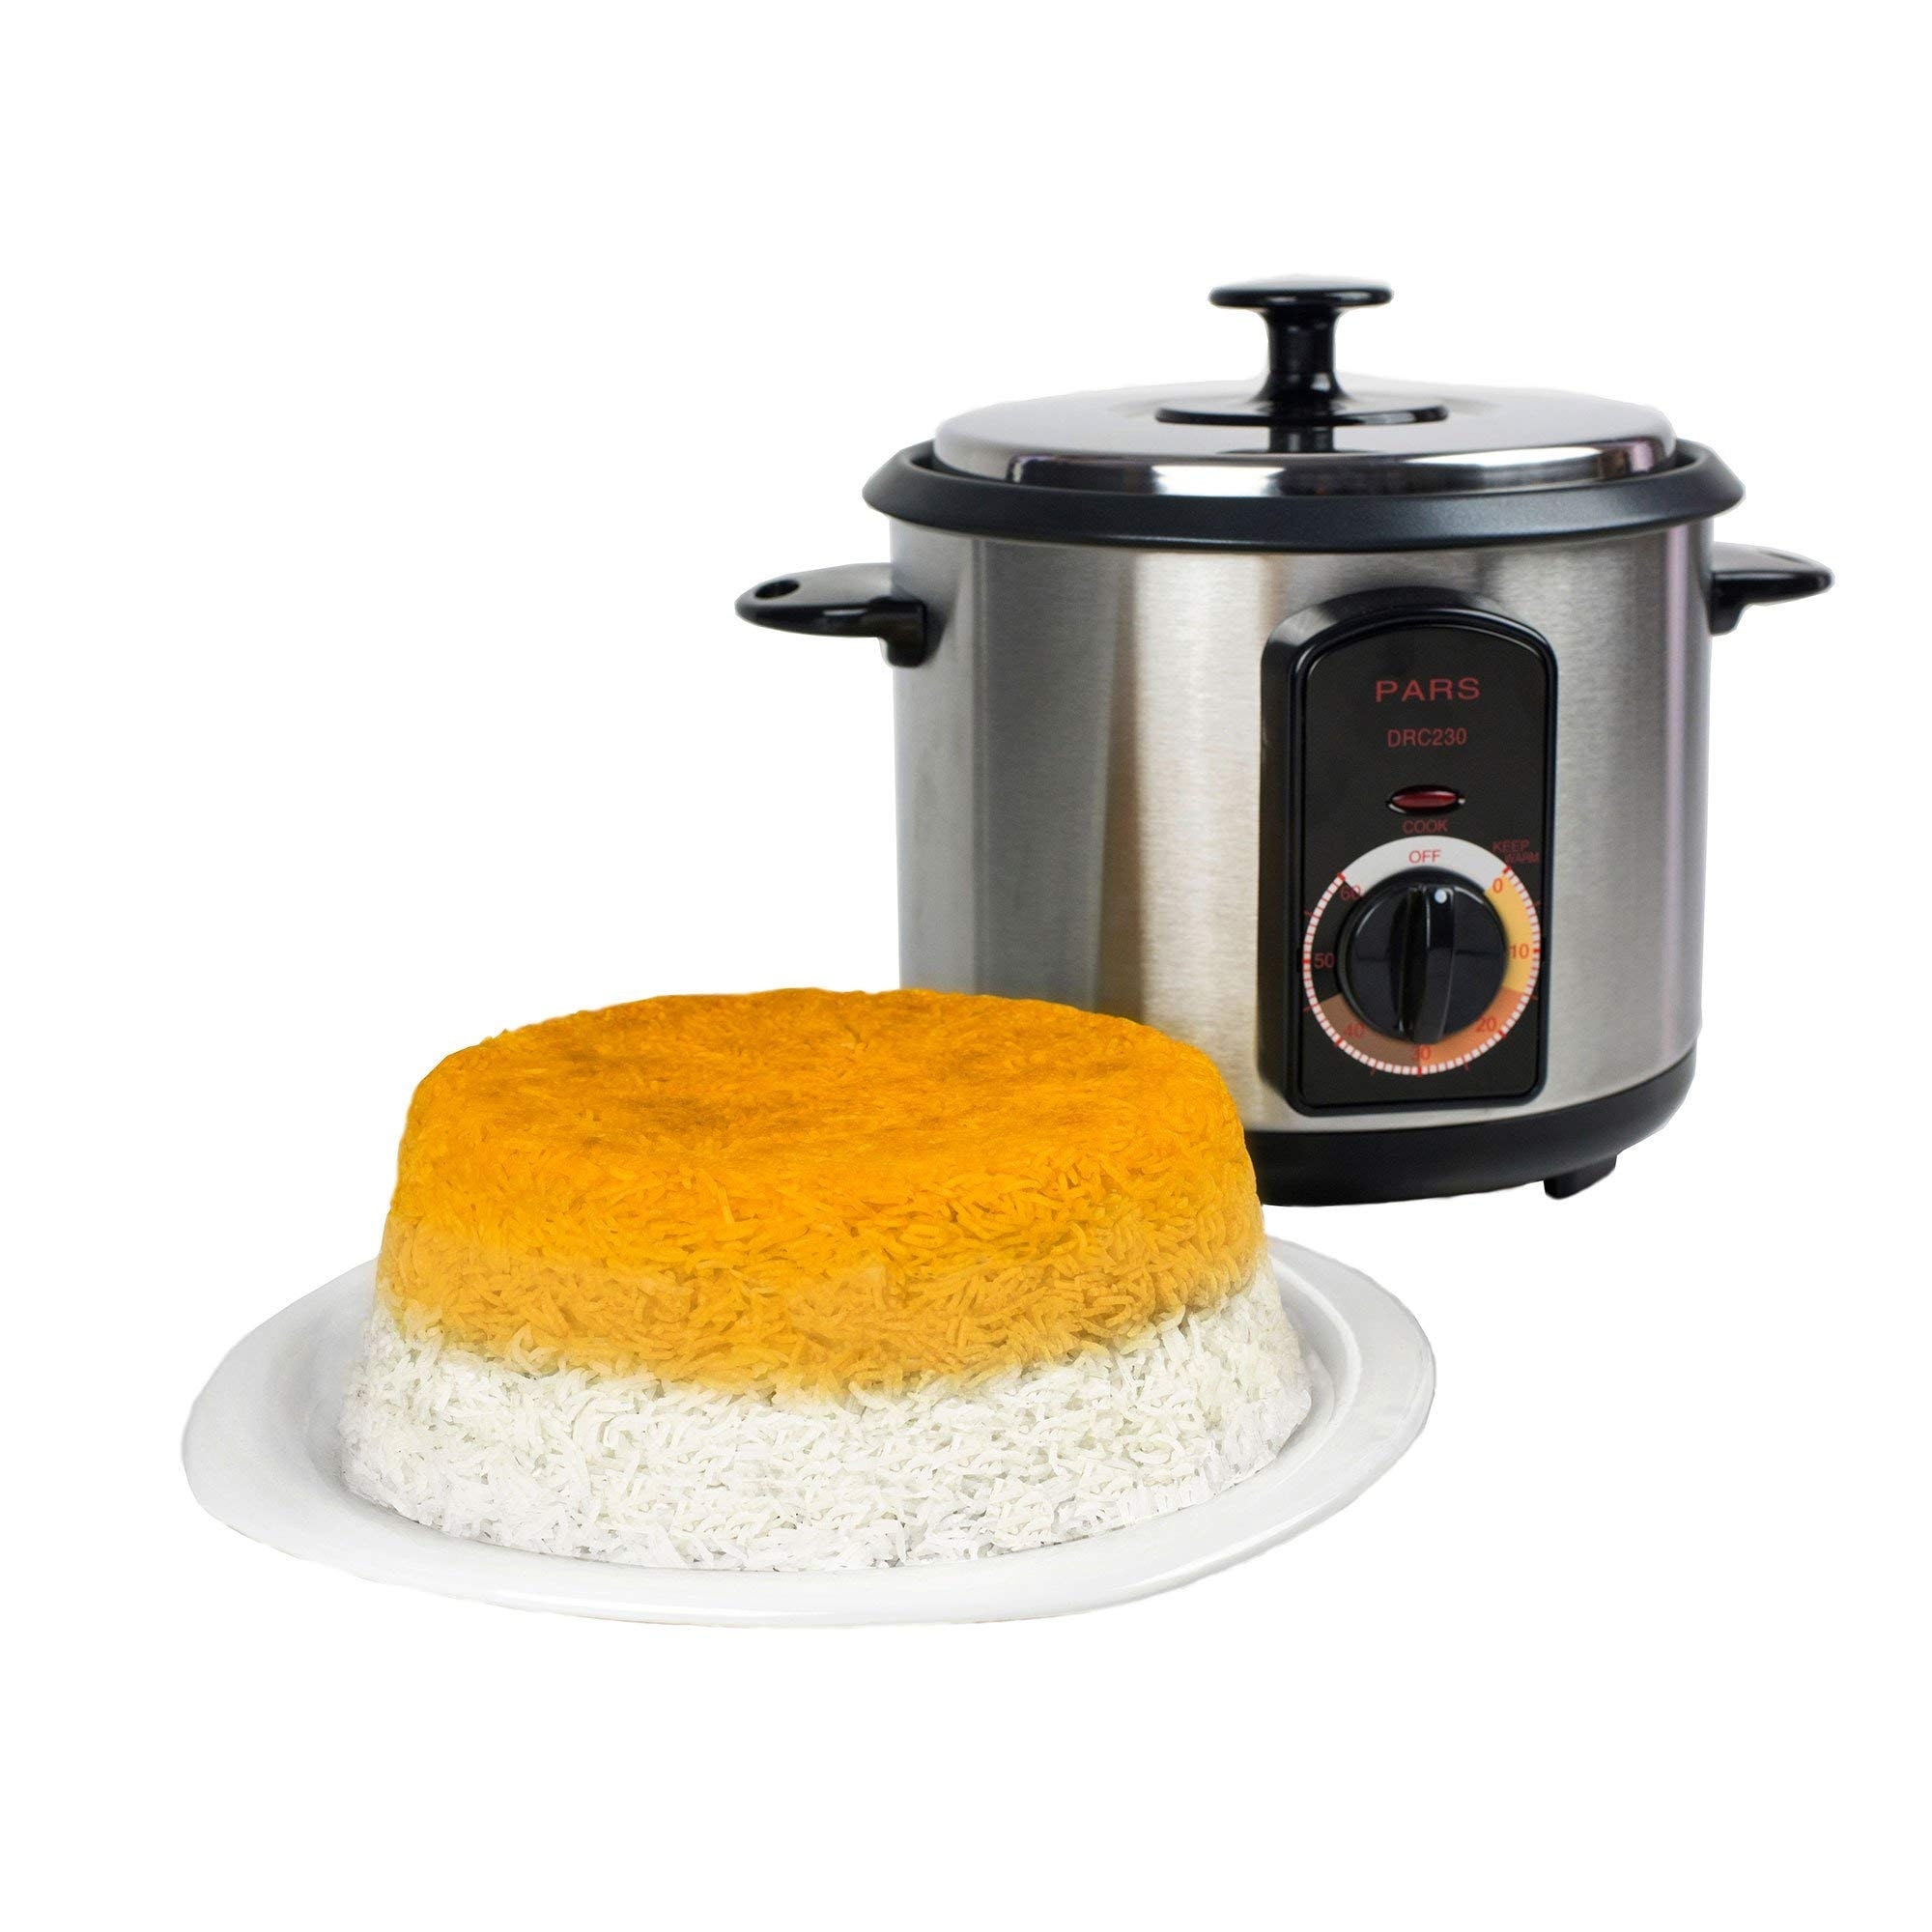 https://ak1.ostkcdn.com/images/products/is/images/direct/07e9fcf99d3d8404af70615e5f6ef04df5c9f0c1/Automatic-Persian-Rice-Cooker-%2815-Cup%29%2C-Large-Family-Rice-Cooker.jpg